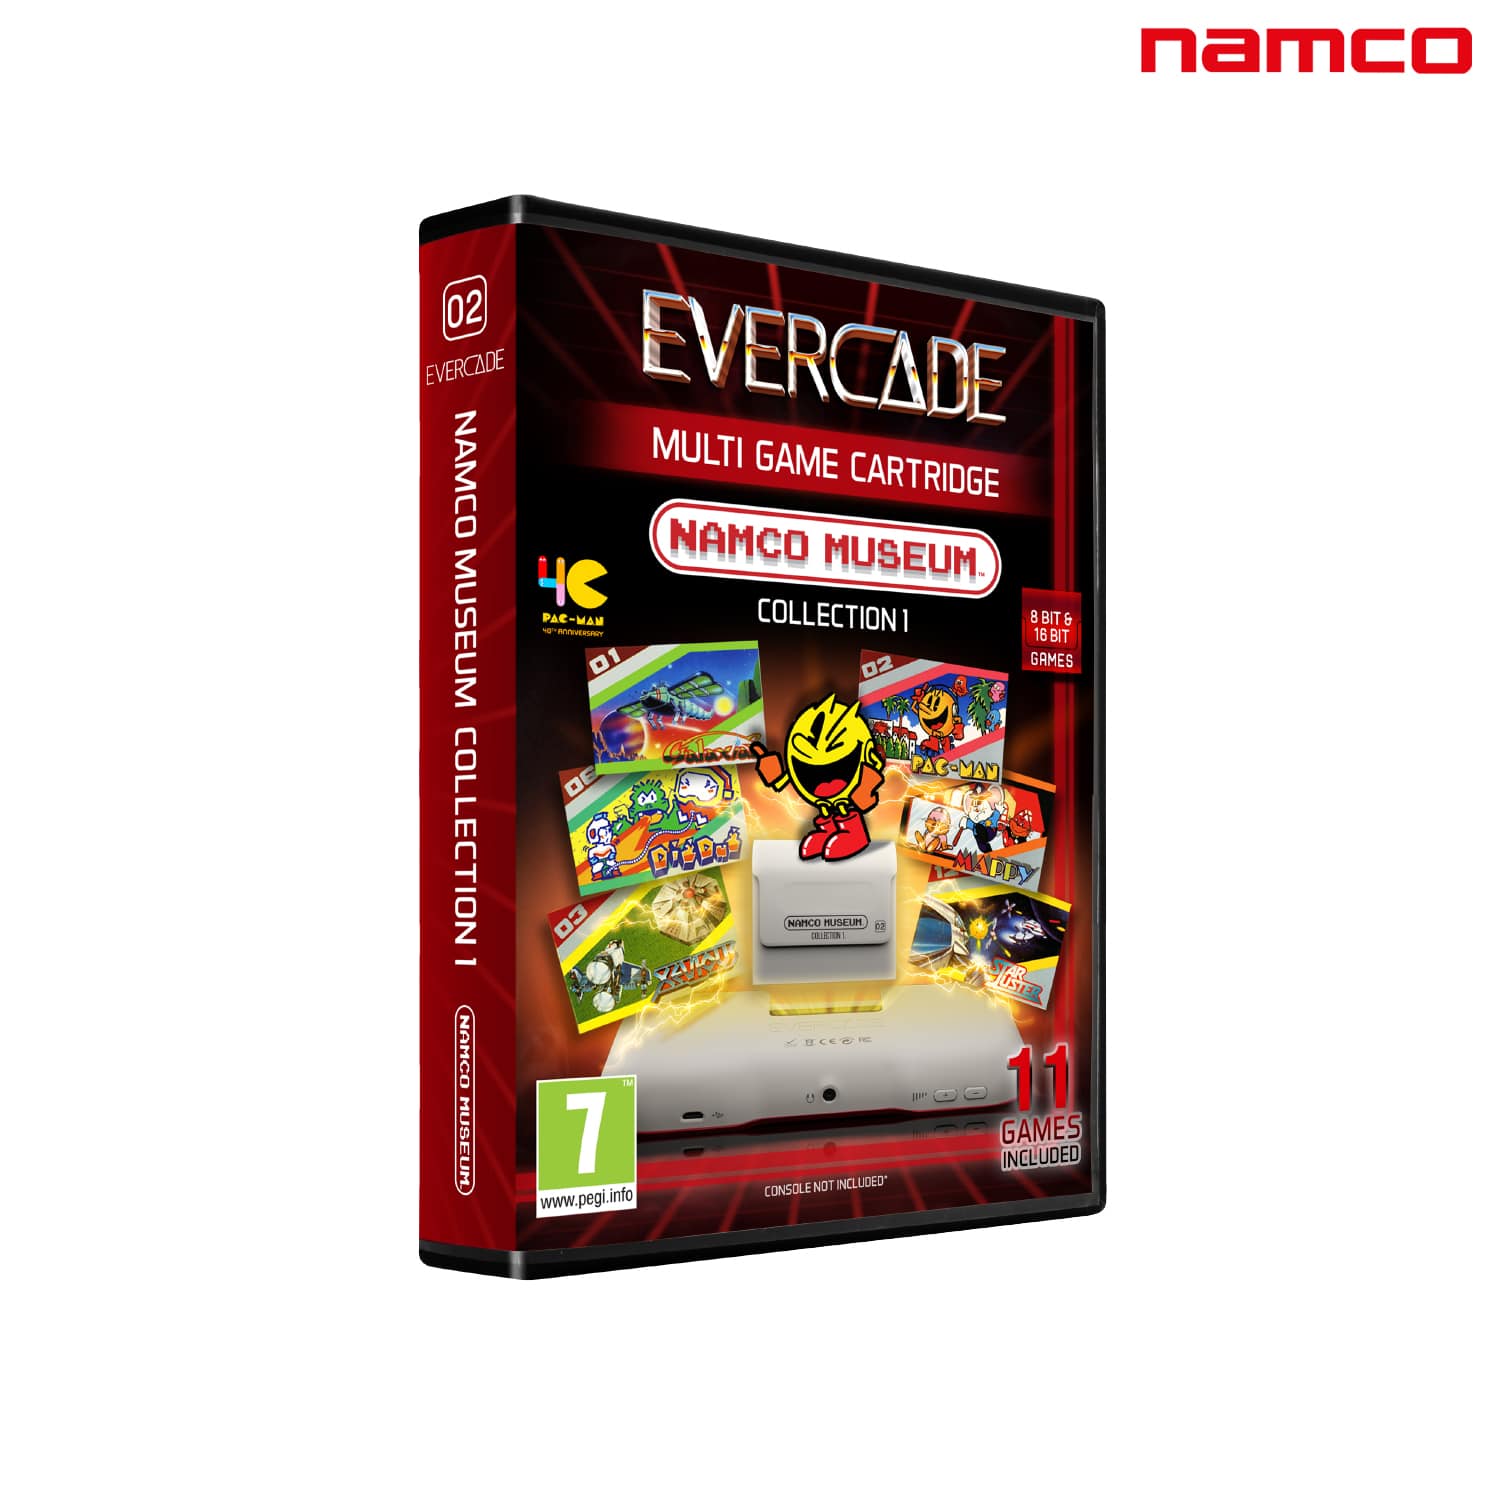 namco museum collection 1 evercade cartridge front of box packaging